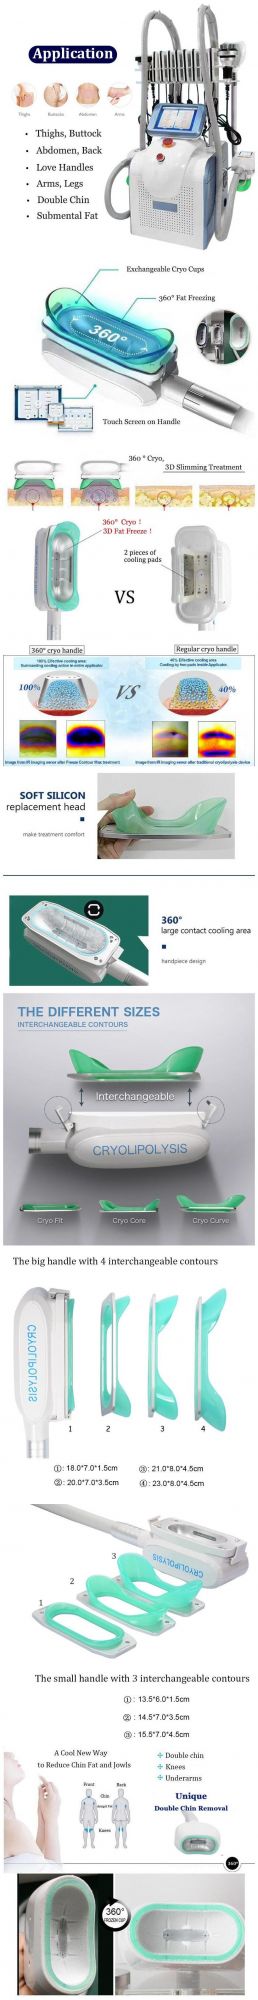 7 in 1 Cryolipolysis Cool Shaping Fat Freezing Slimming Beauty Machine